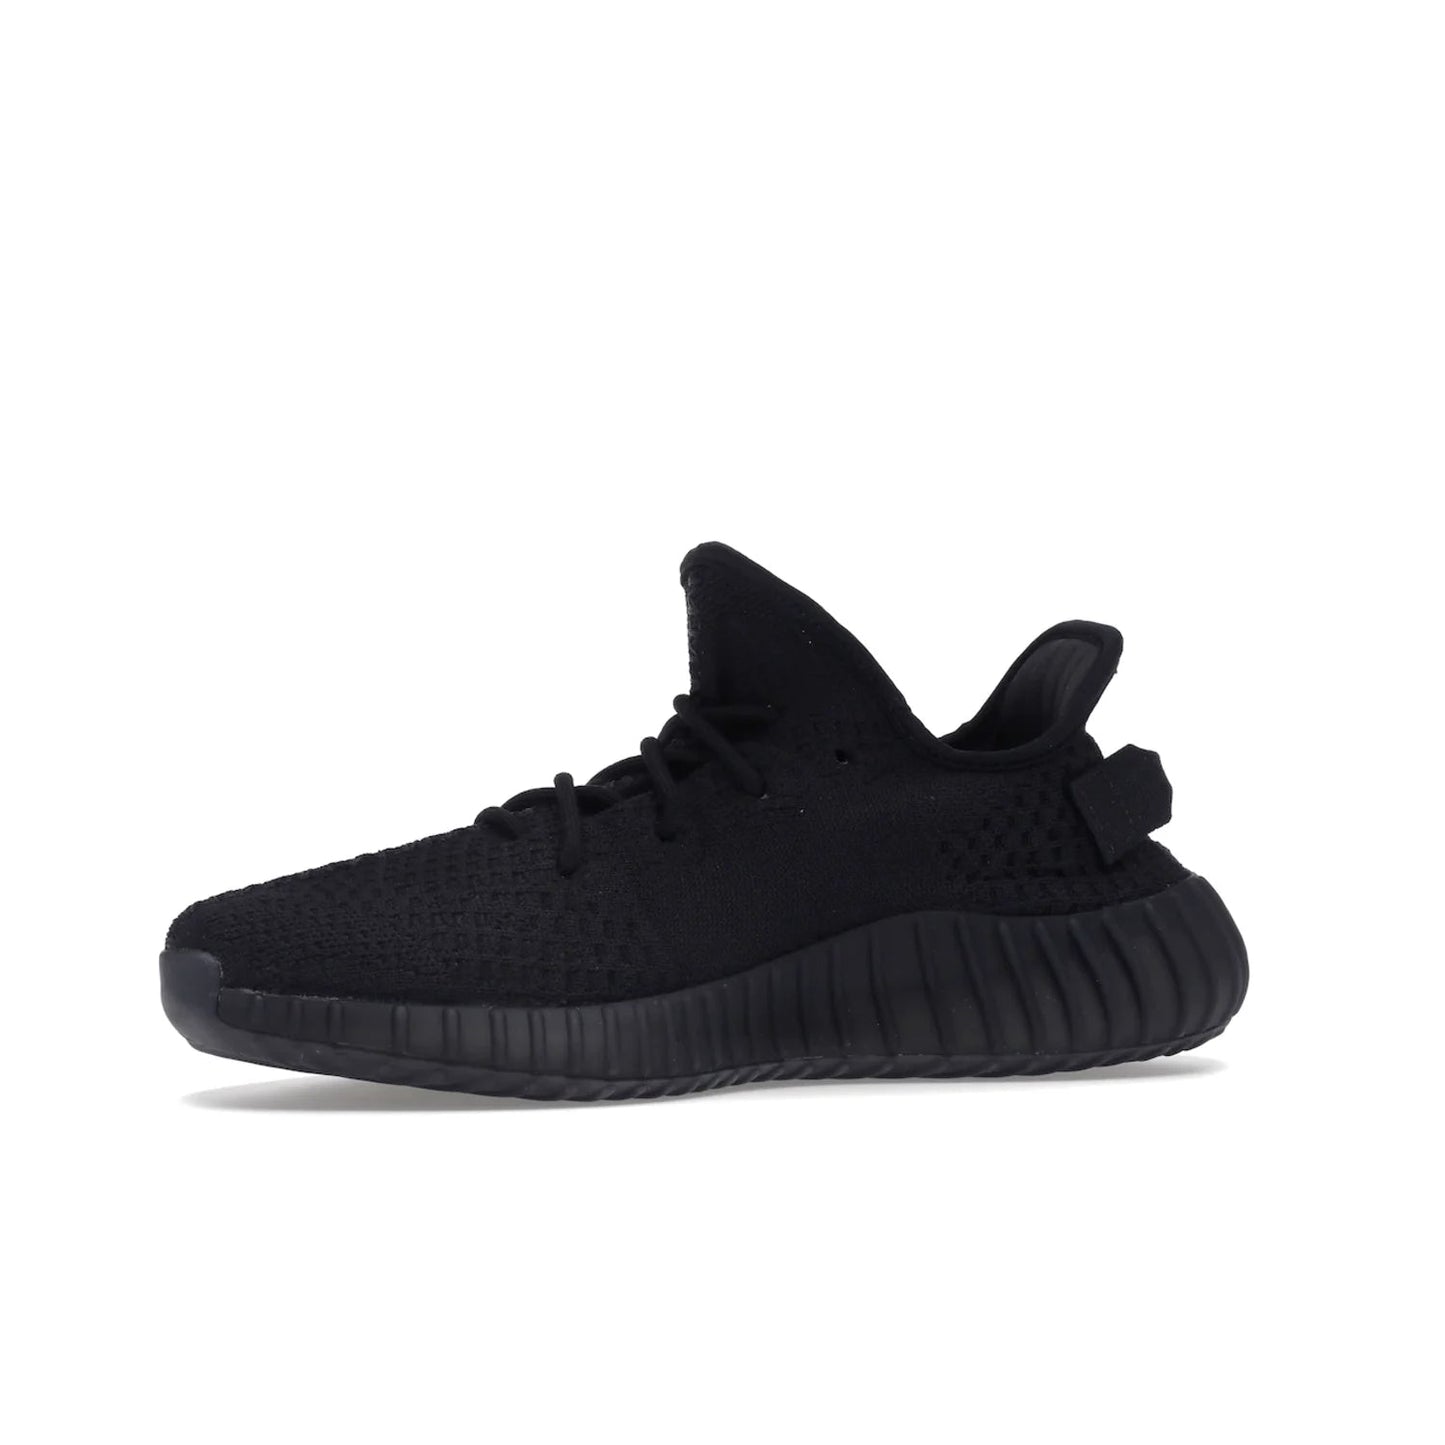 adidas Yeezy Boost 350 V2 Onyx - Image 17 - Only at www.BallersClubKickz.com - Adidas Yeezy Boost 350 V2 Onyx Triple Black shoes for comfort and style. Arriving Spring 2022.